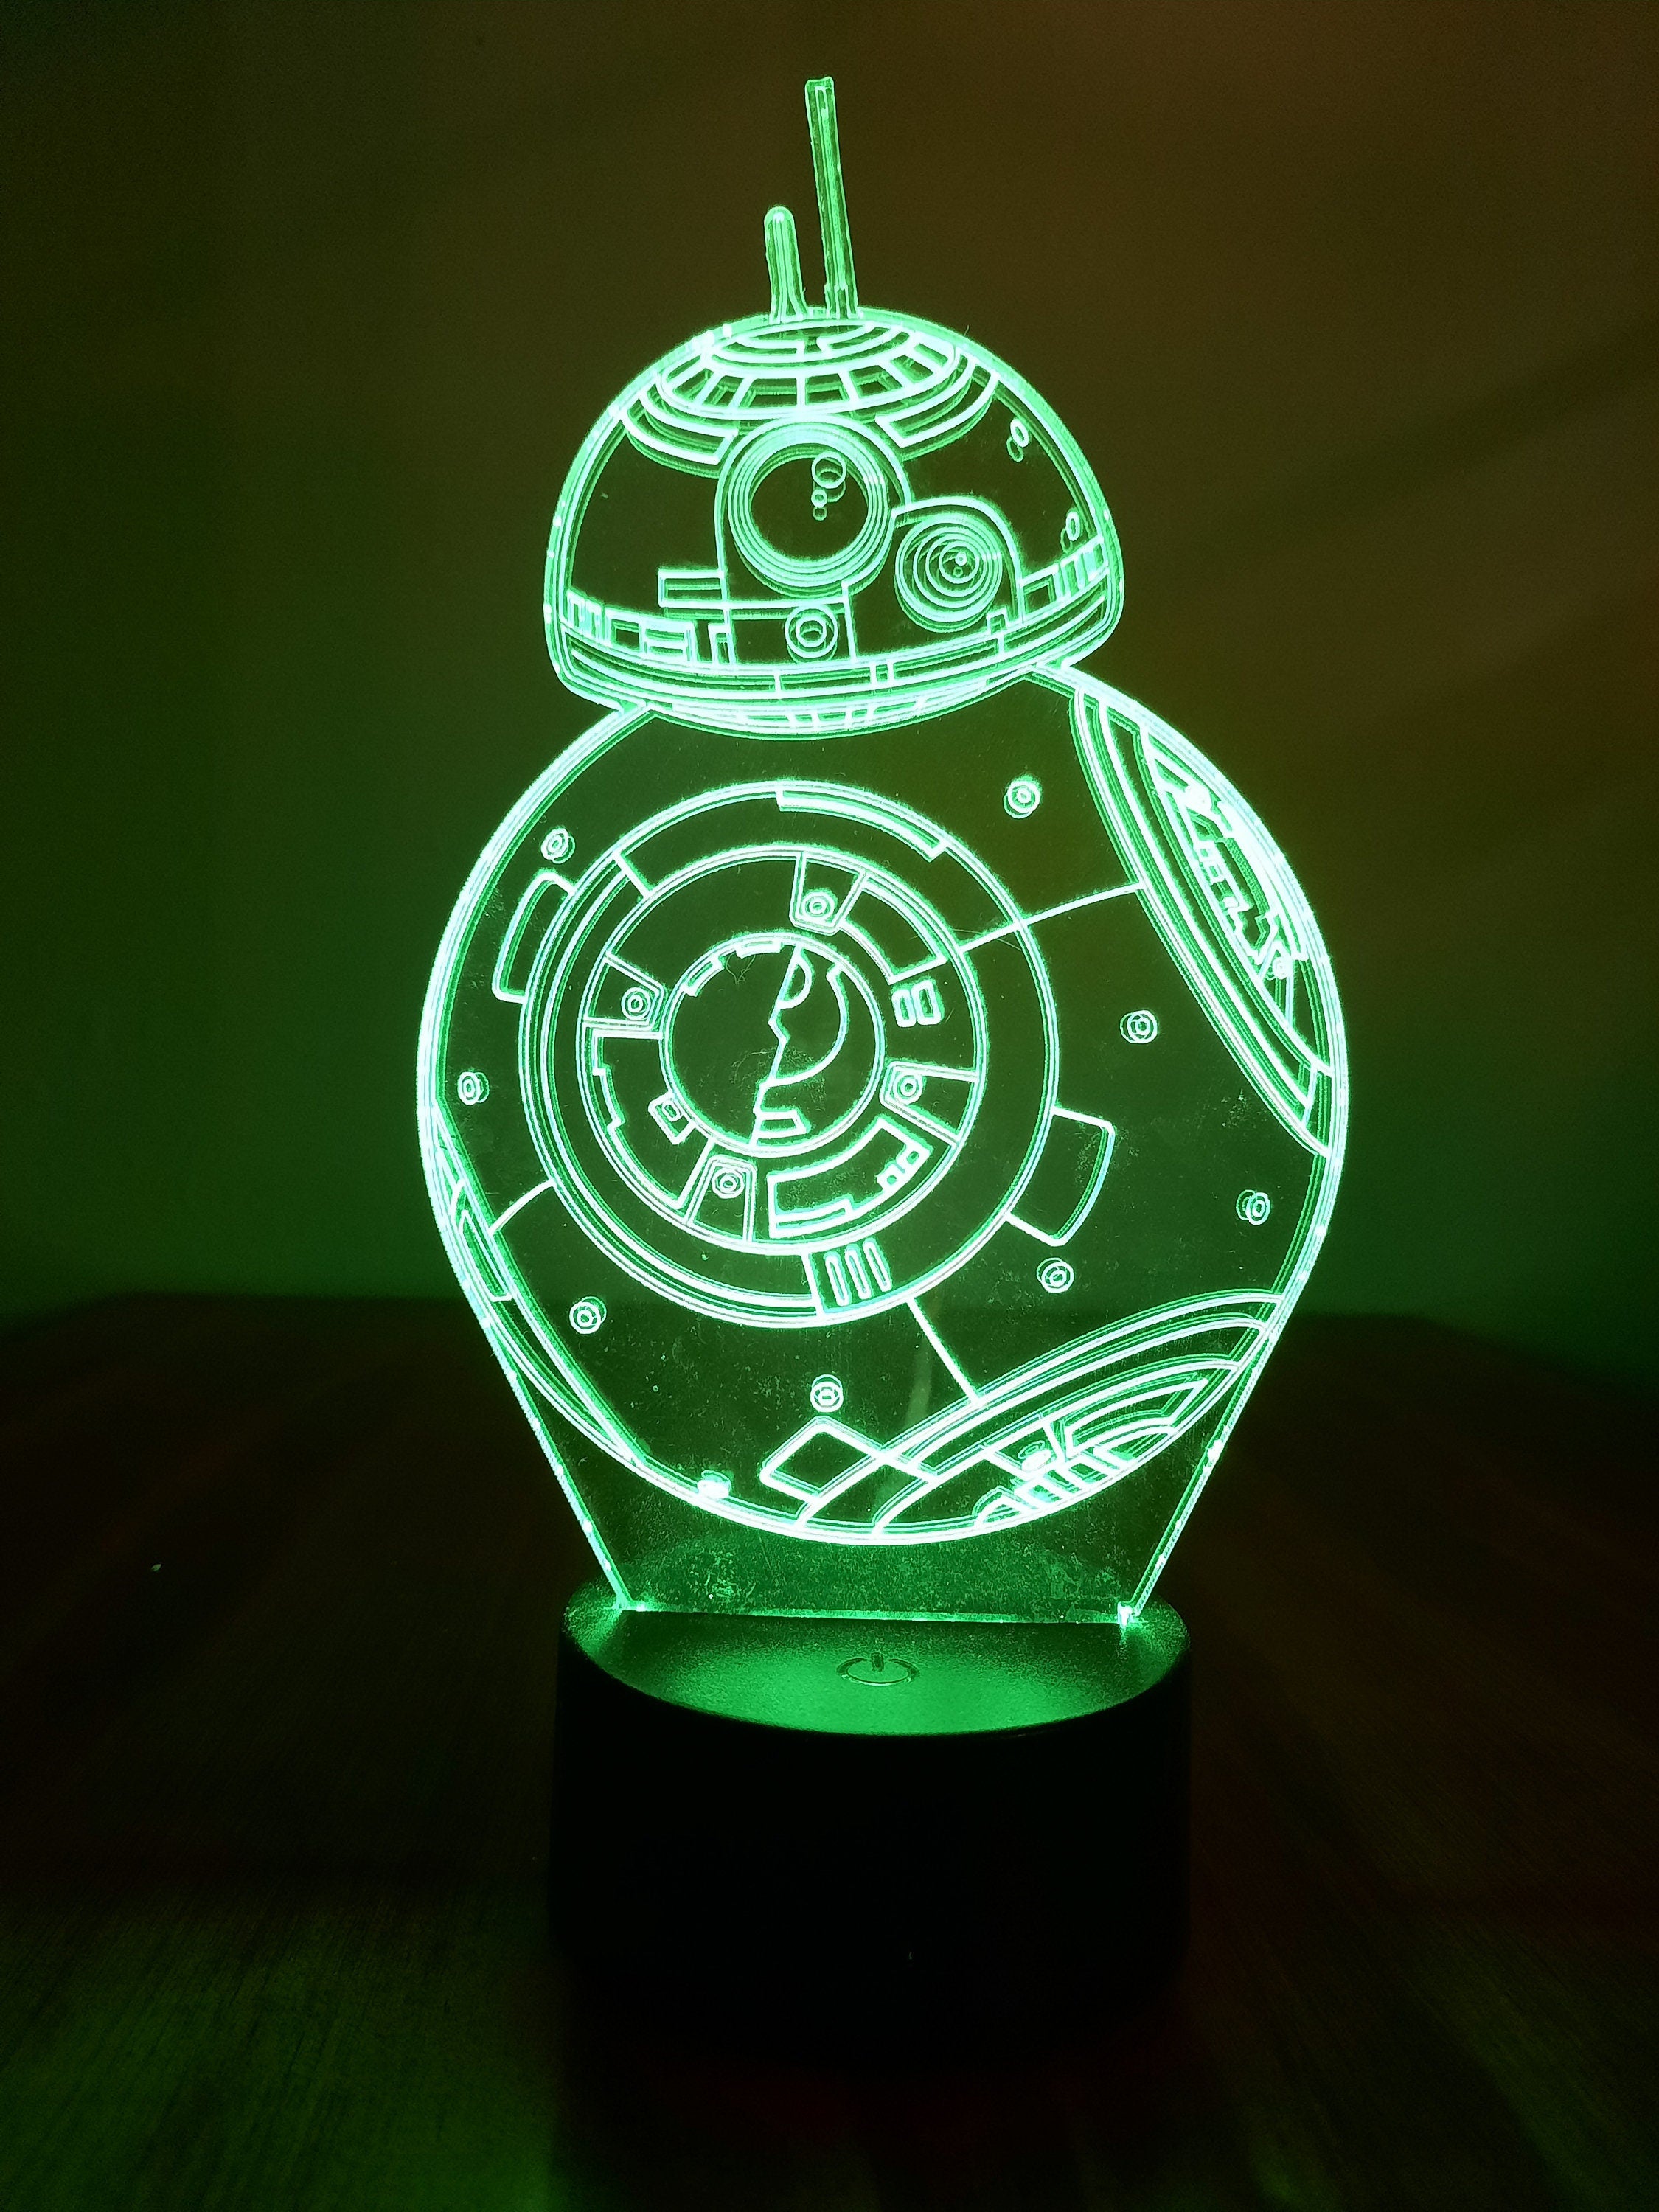 Awesome "Star Wars BB-8 Robot" 3D LED Lamp (1248) - FREE Shipping!